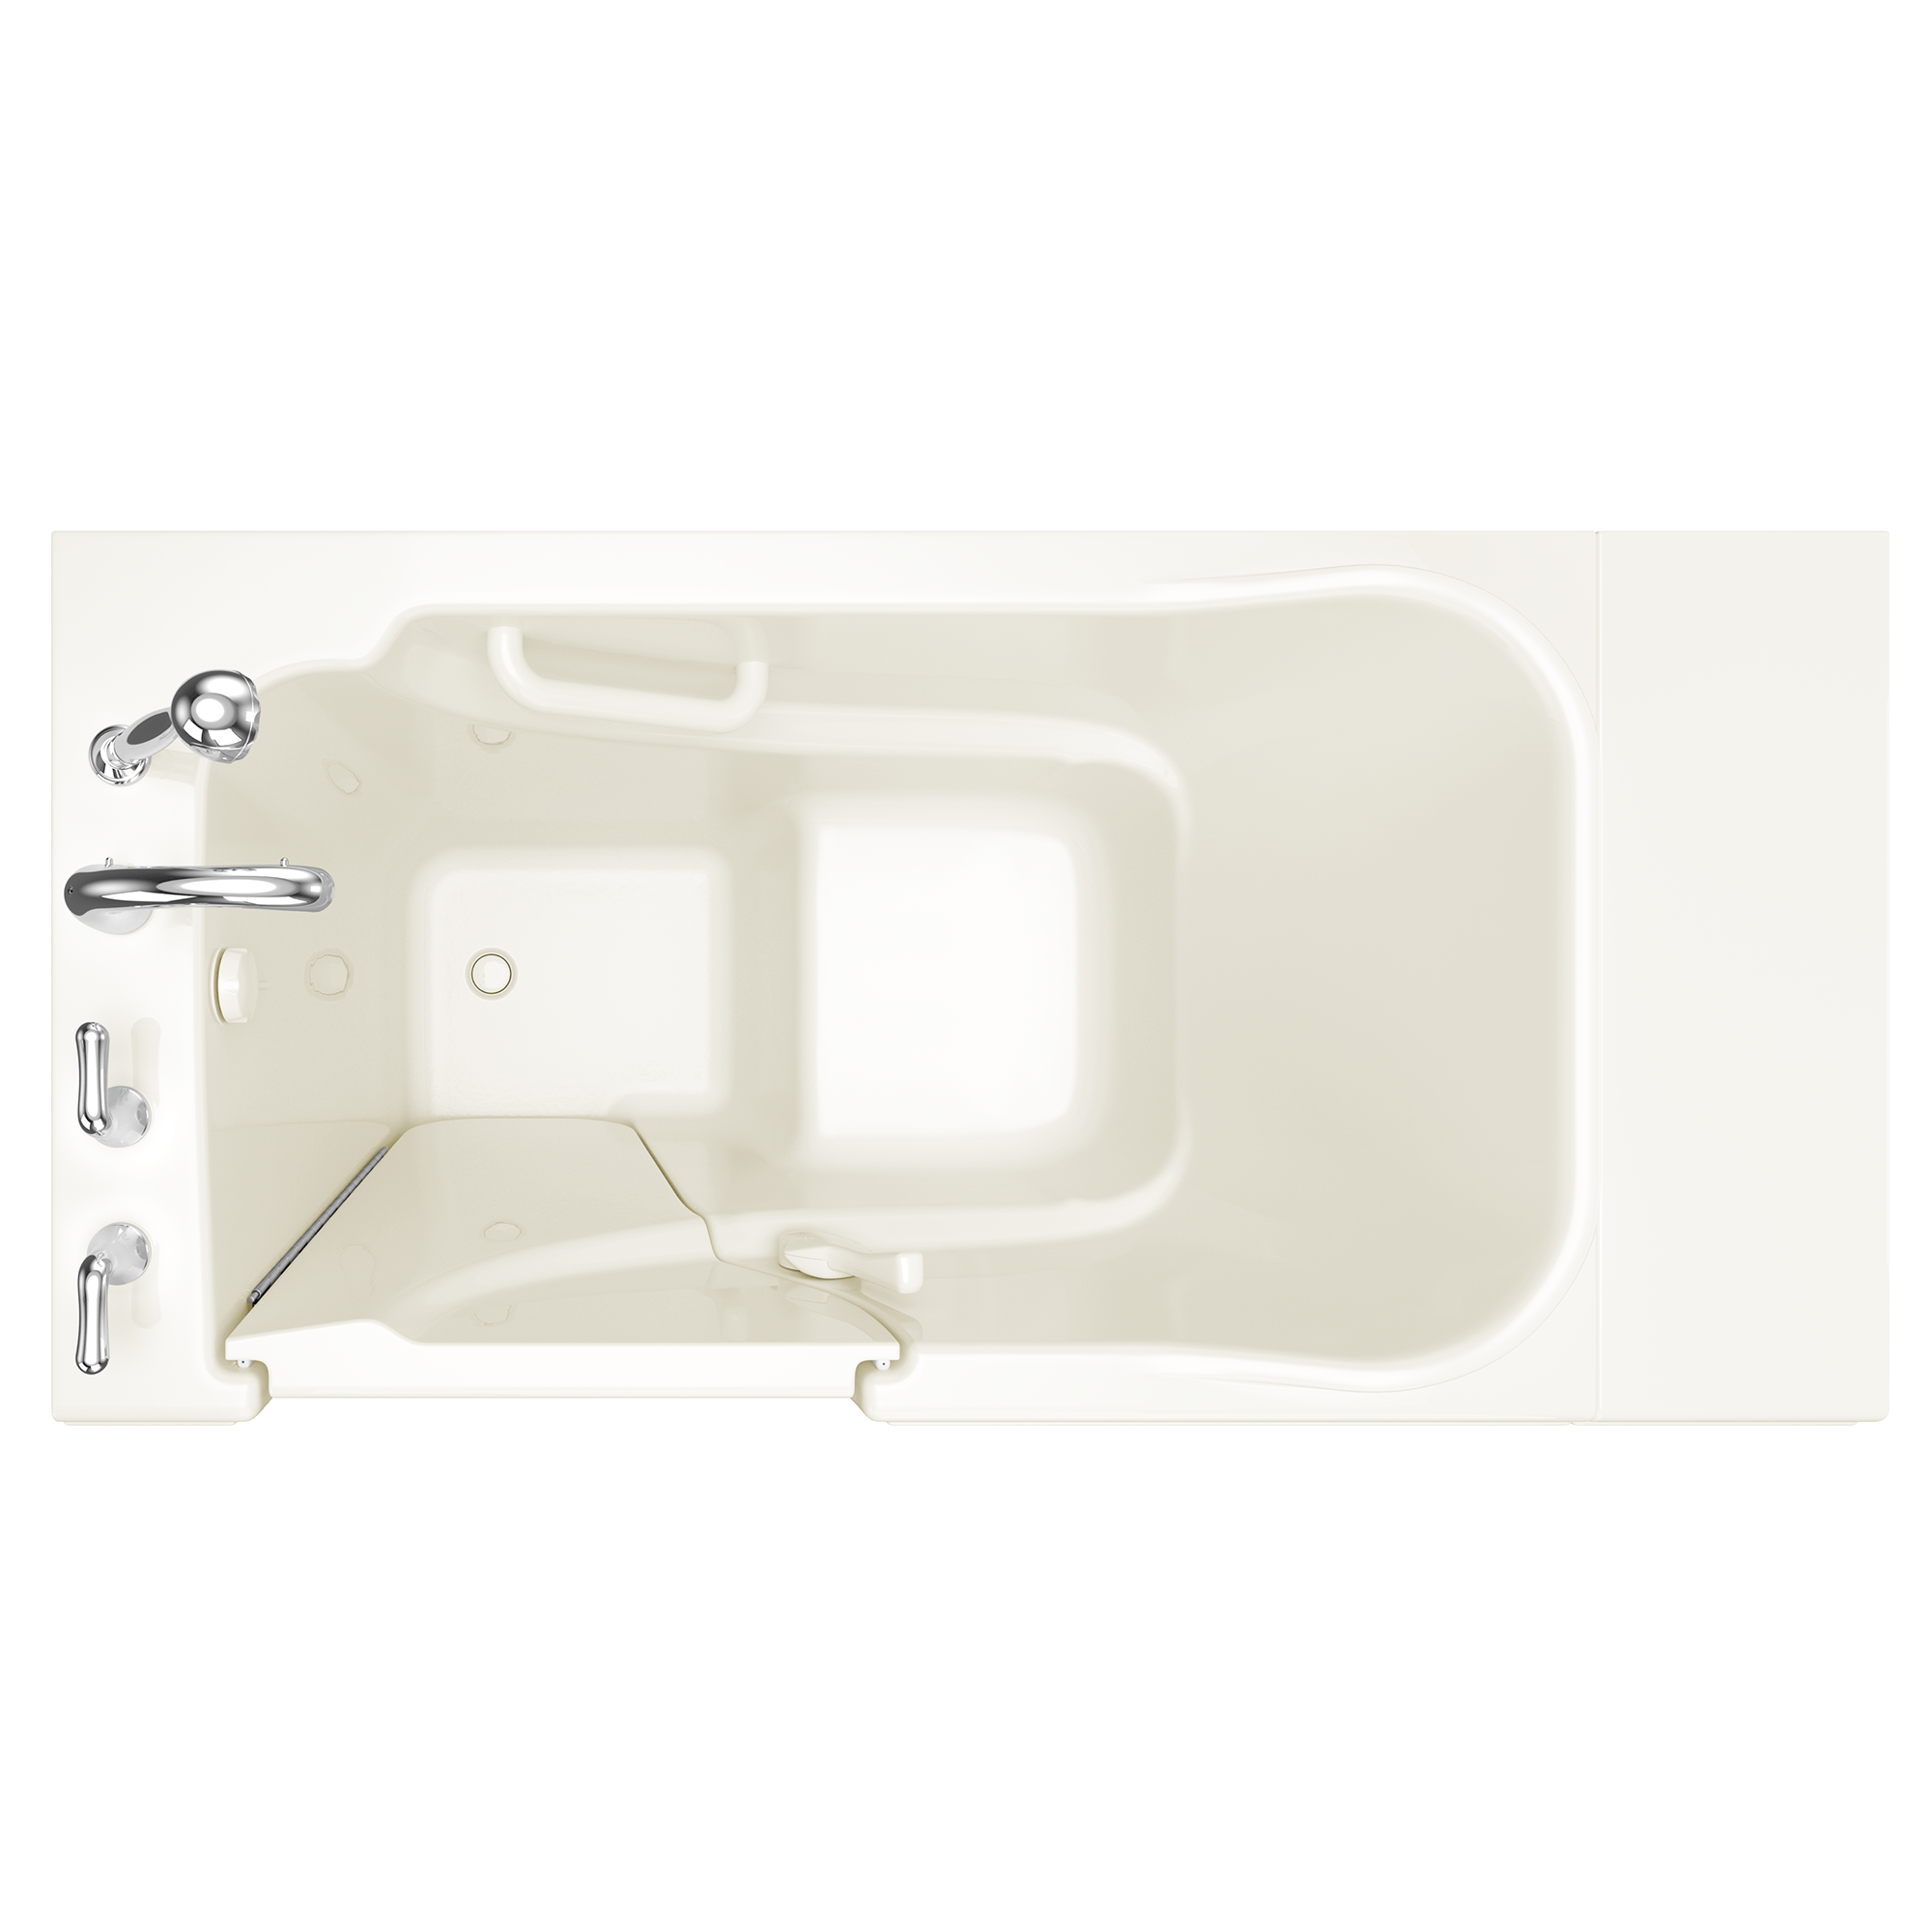 Gelcoat Entry Series 52 x 30 Inch Walk In Tub With Soaker System - Left Hand Drain With Faucet BISCUIT